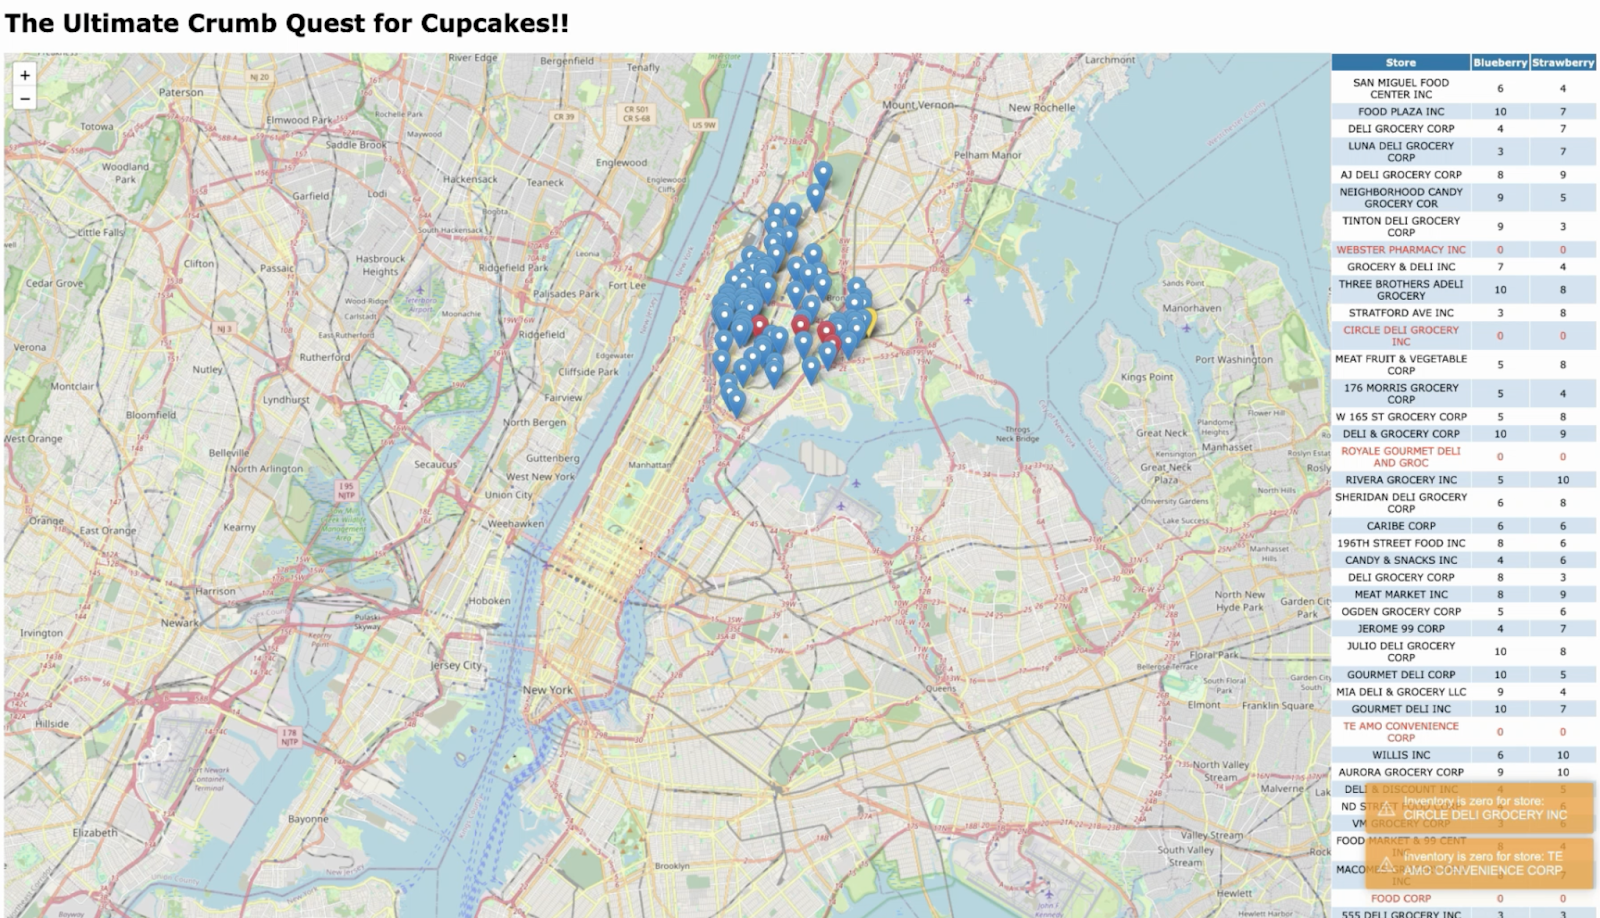 Real-time cupcake stock map powered by Vercel 